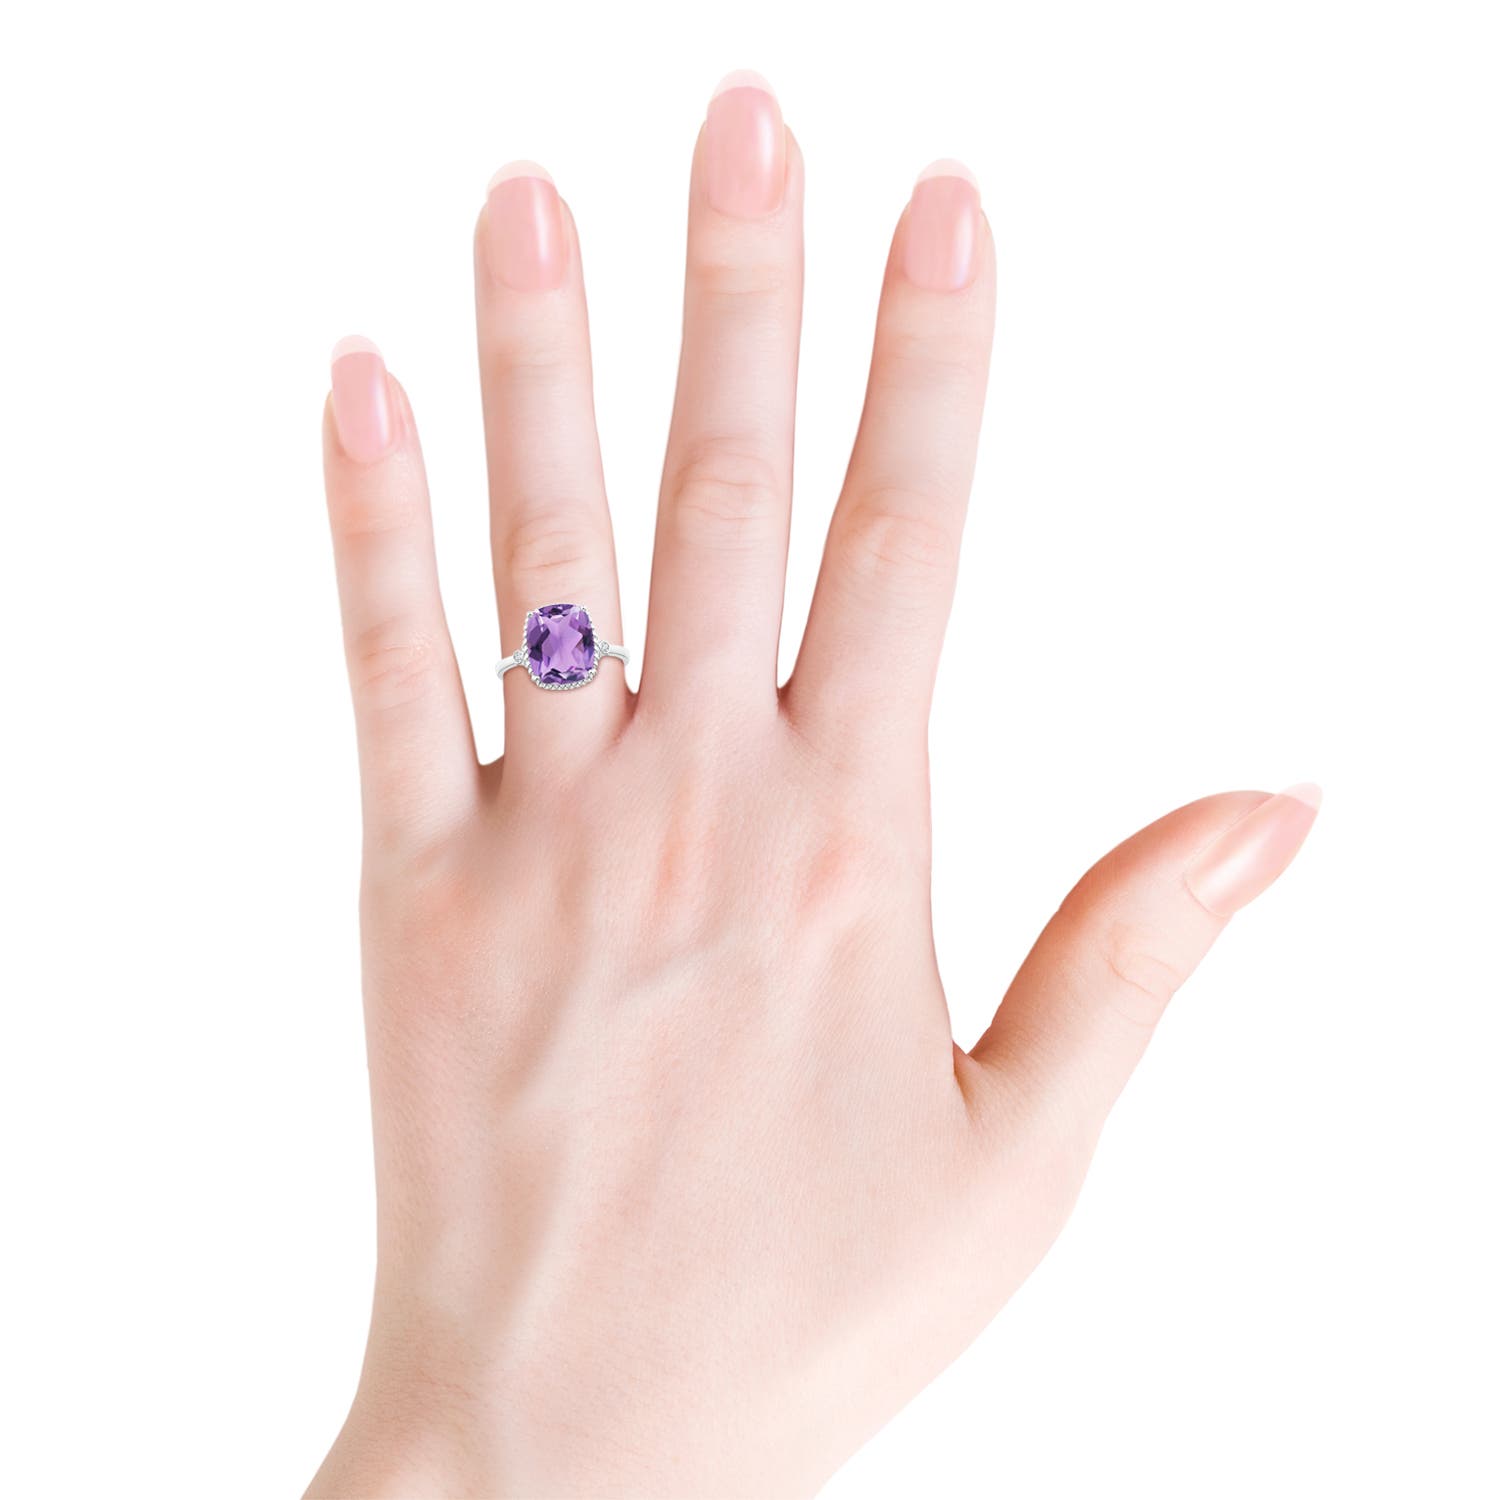 A - Amethyst / 3.58 CT / 14 KT White Gold